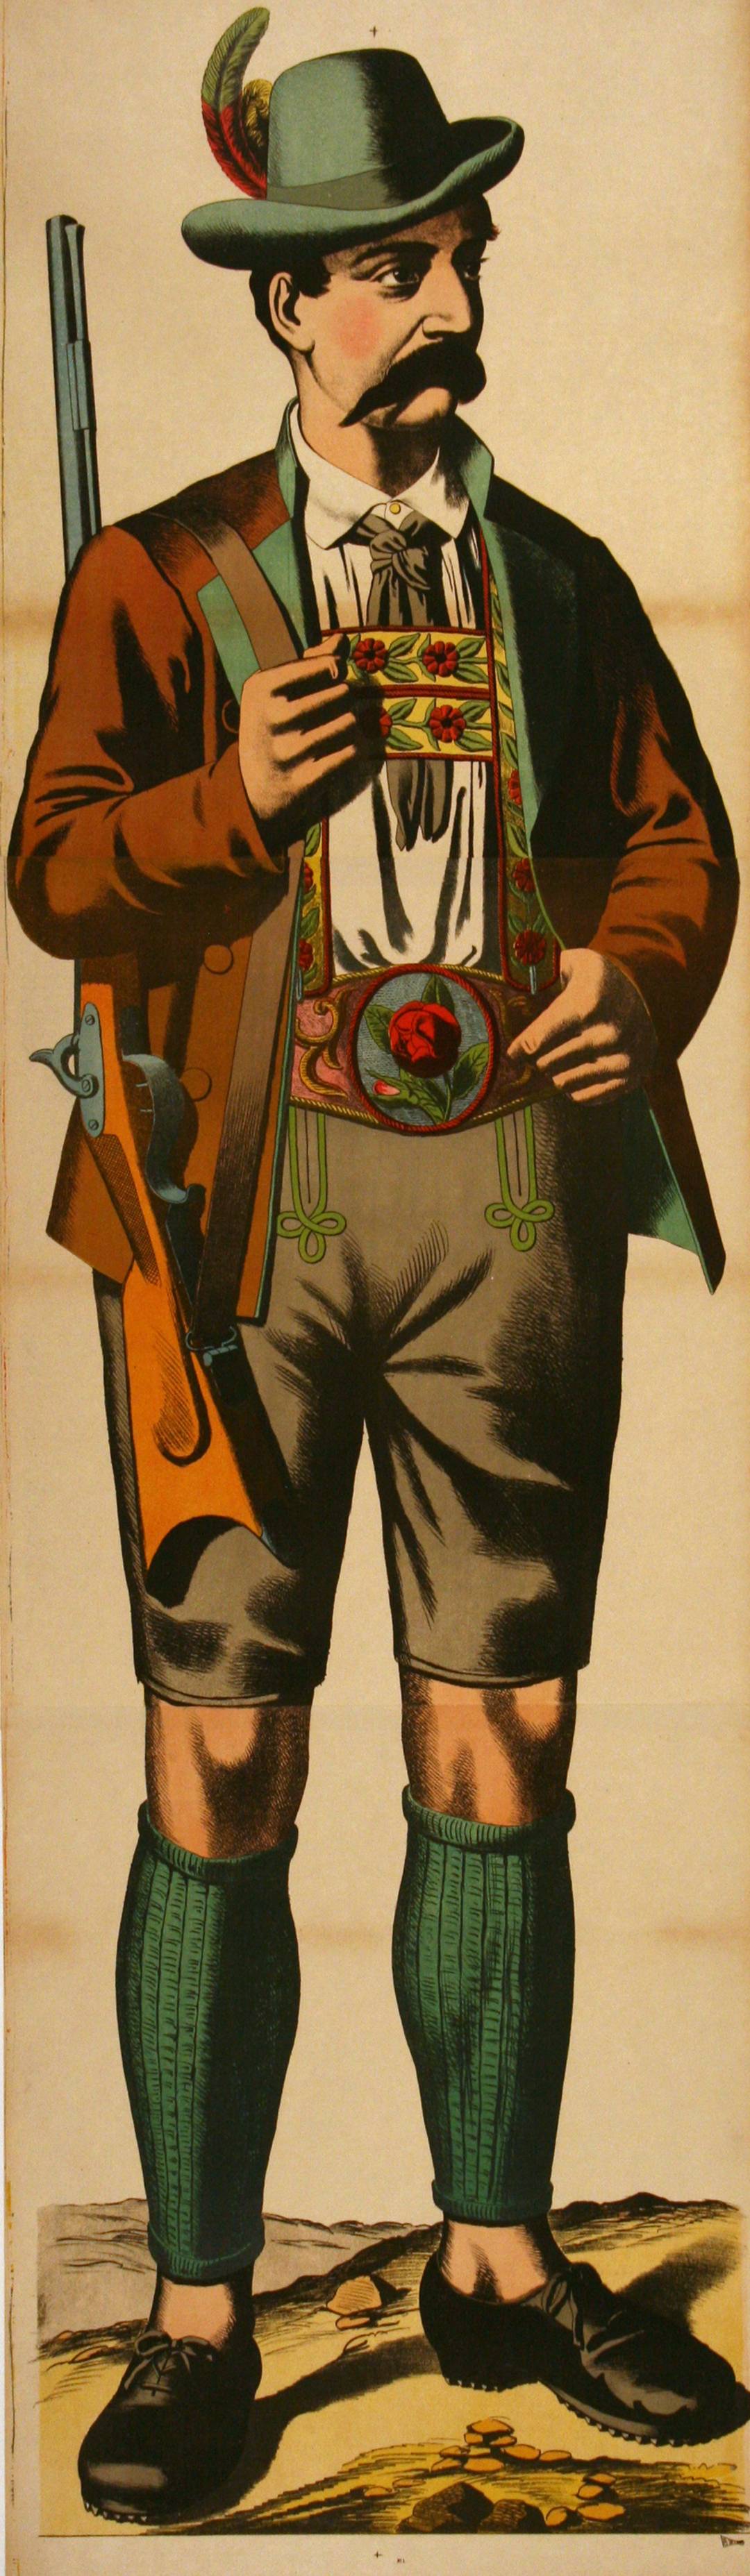 Authentic Vintage Poster  Wissembourg Firefighter No. 8030